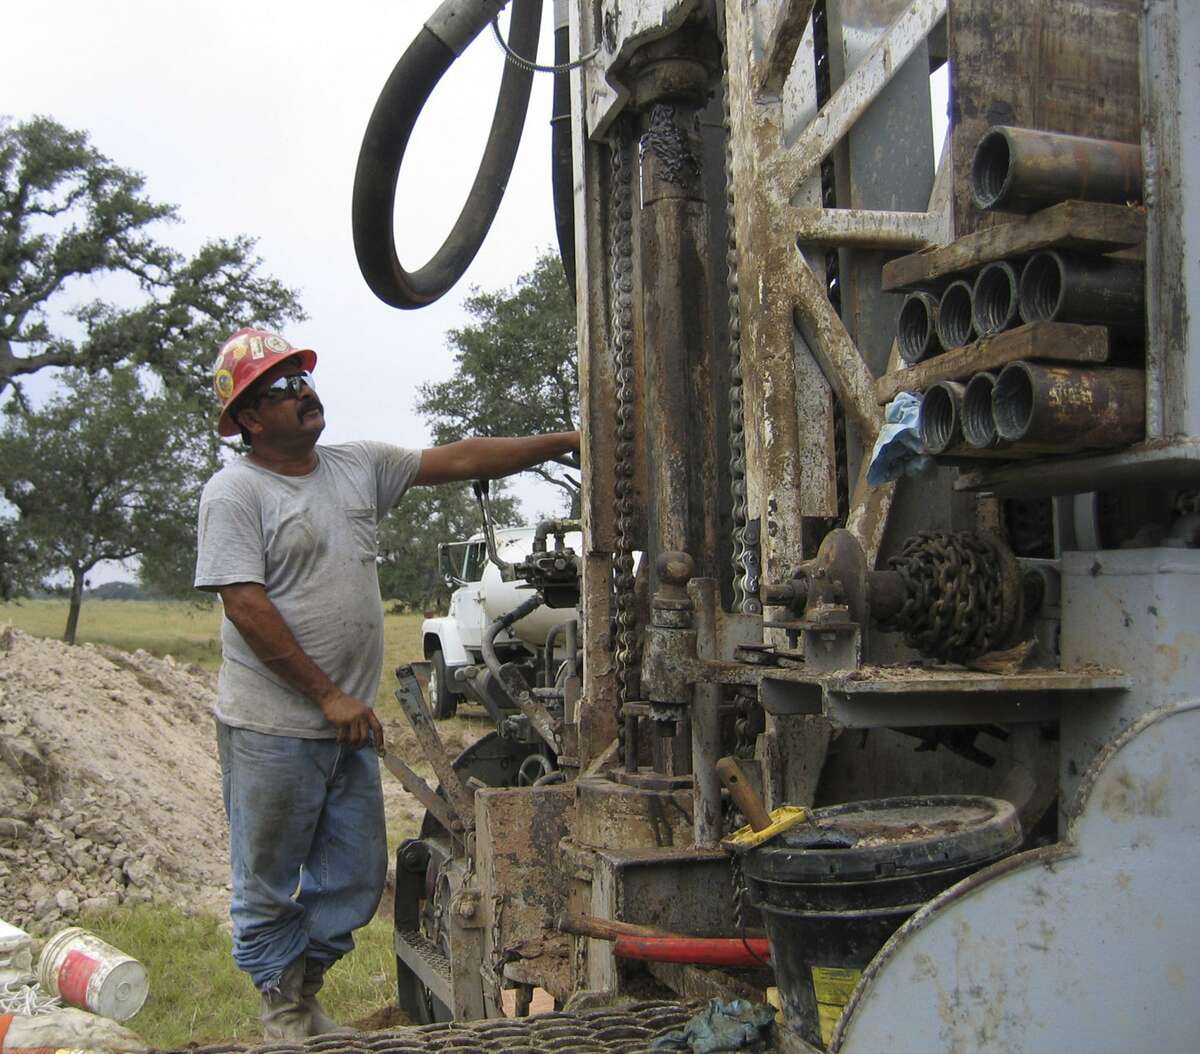 Efrain Gutierrez, 39, a driller from Hebbronville, operates a rig outside of Goliad, searchng for uranium deposits in the Goliad Aquifer in 2006. When uranium mining was active (as recently as 2011), the industry contributed enormously to the state economy, creating $311 million in annual economic output.